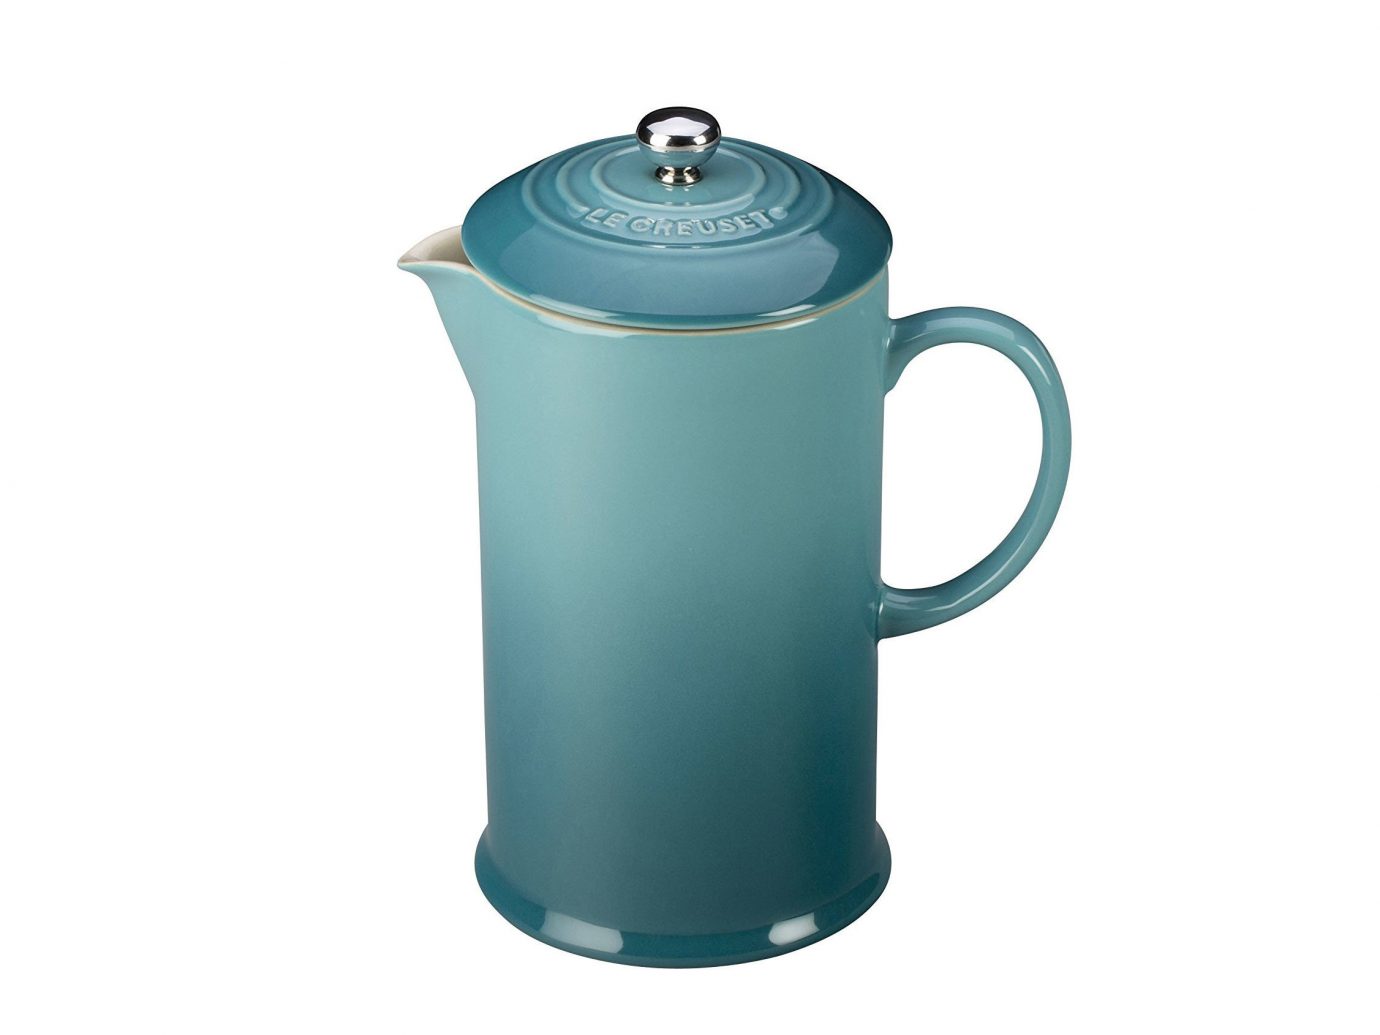 Style + Design man made object kettle small appliance product drinkware bottle tableware kitchenware